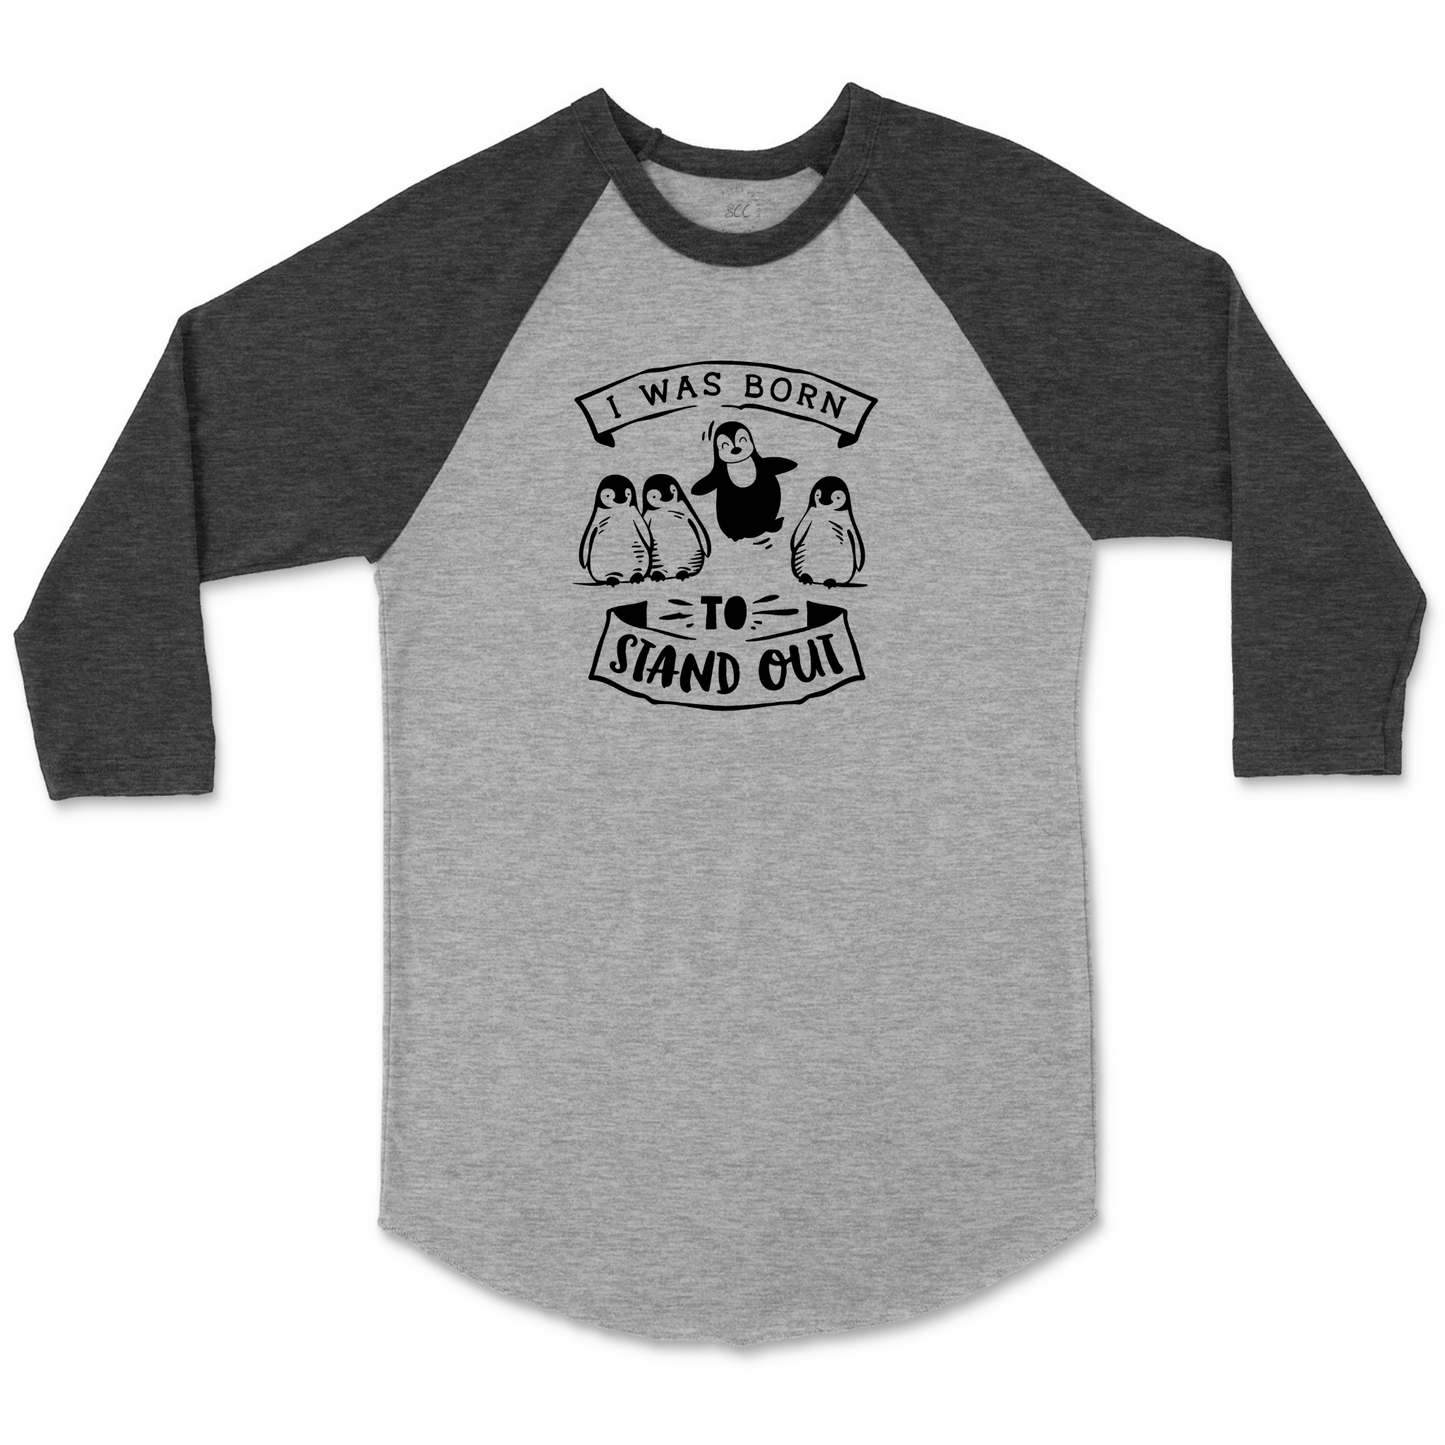 I WAS BORN TO STAND OUT - Youth Raglan Baseball T-Shirt